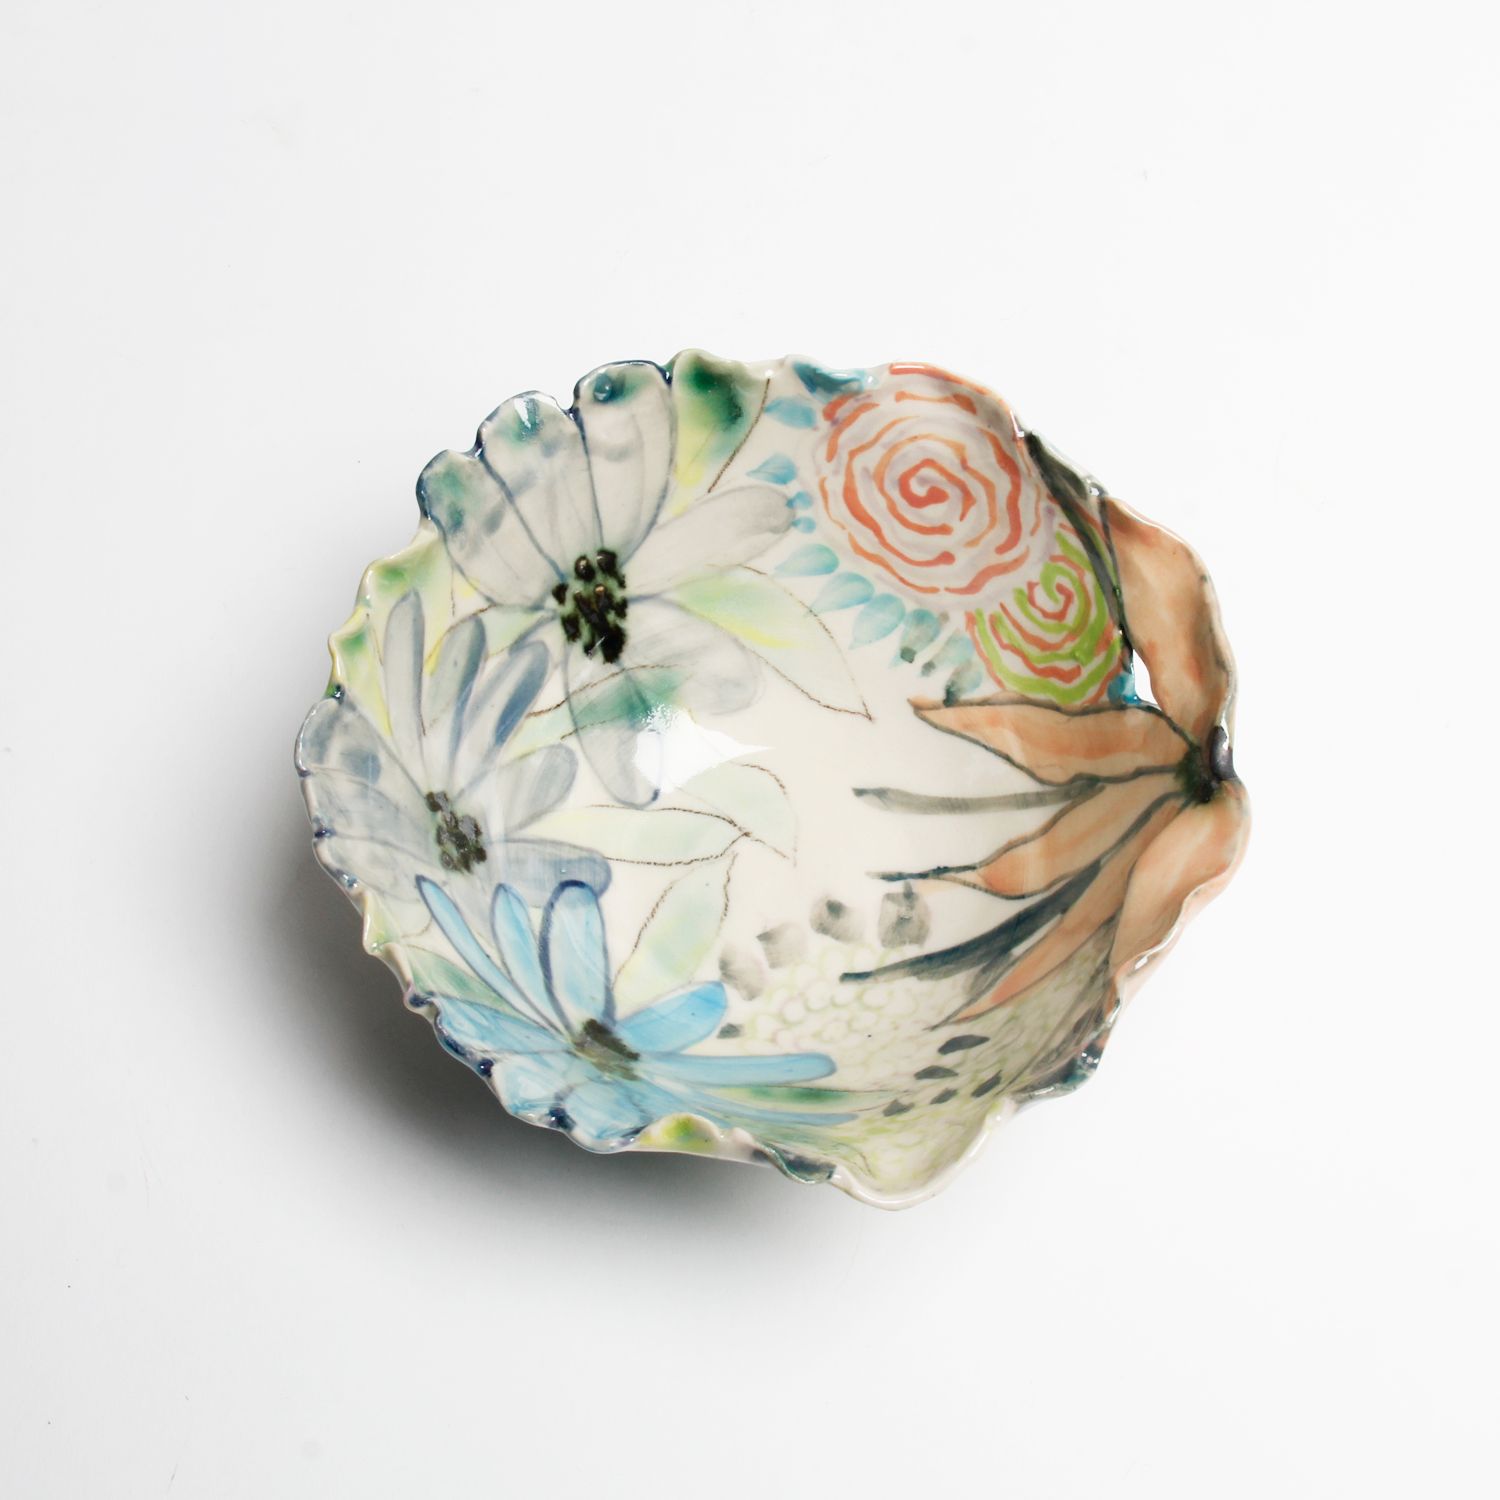 Susan Card: Floral Bowl 1 Product Image 3 of 4